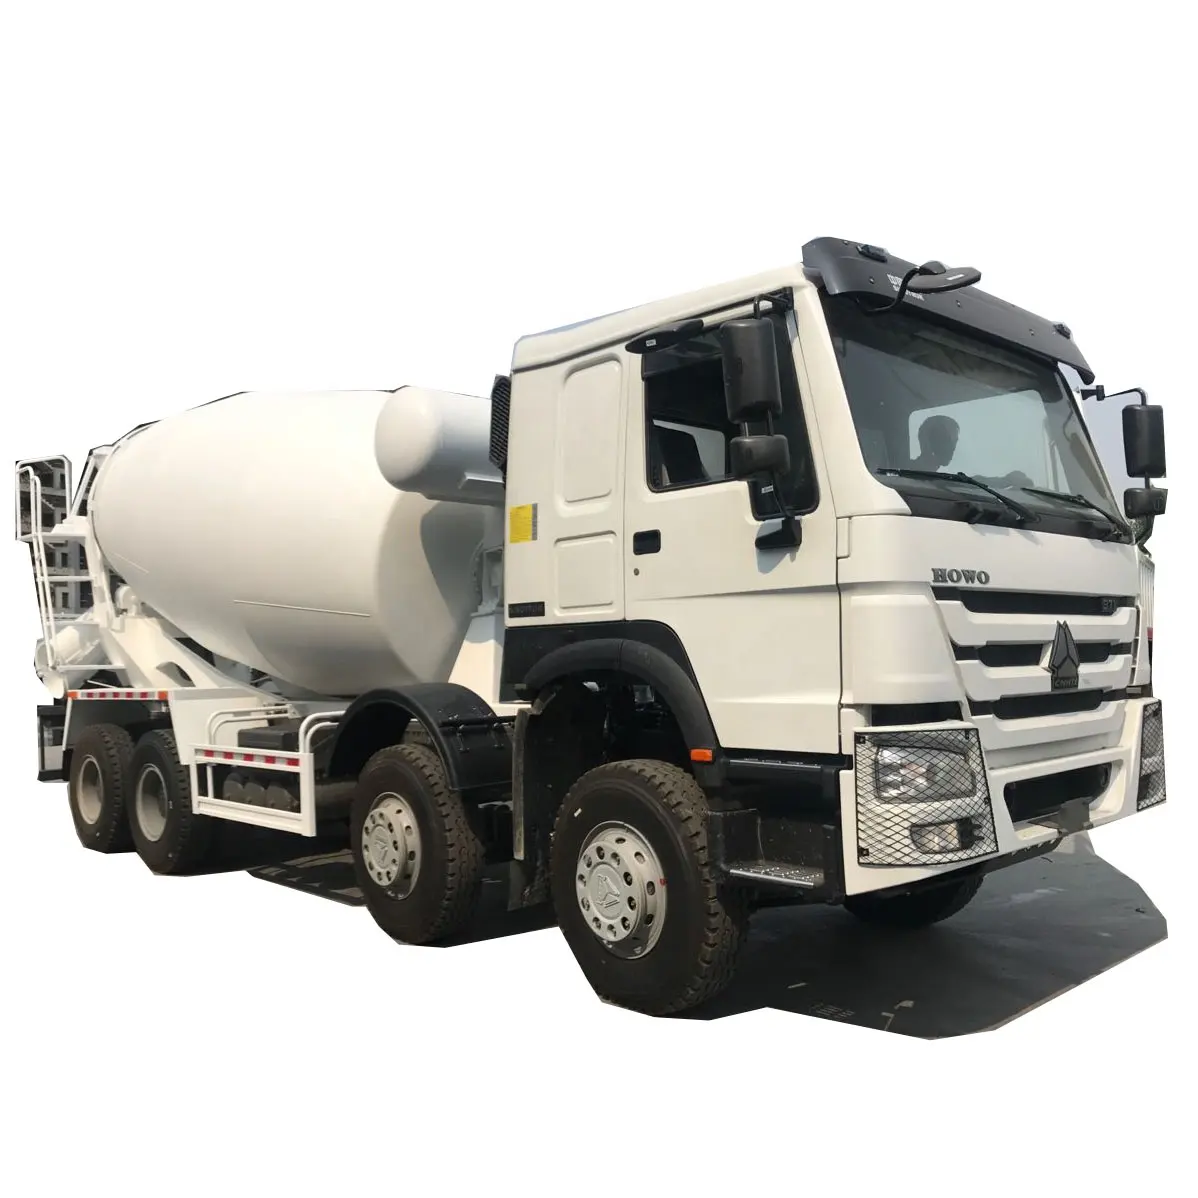 12 14 16 cubic Howo Truck Mixer Ready Mix Cement Concrete Mixer Truck Made In China